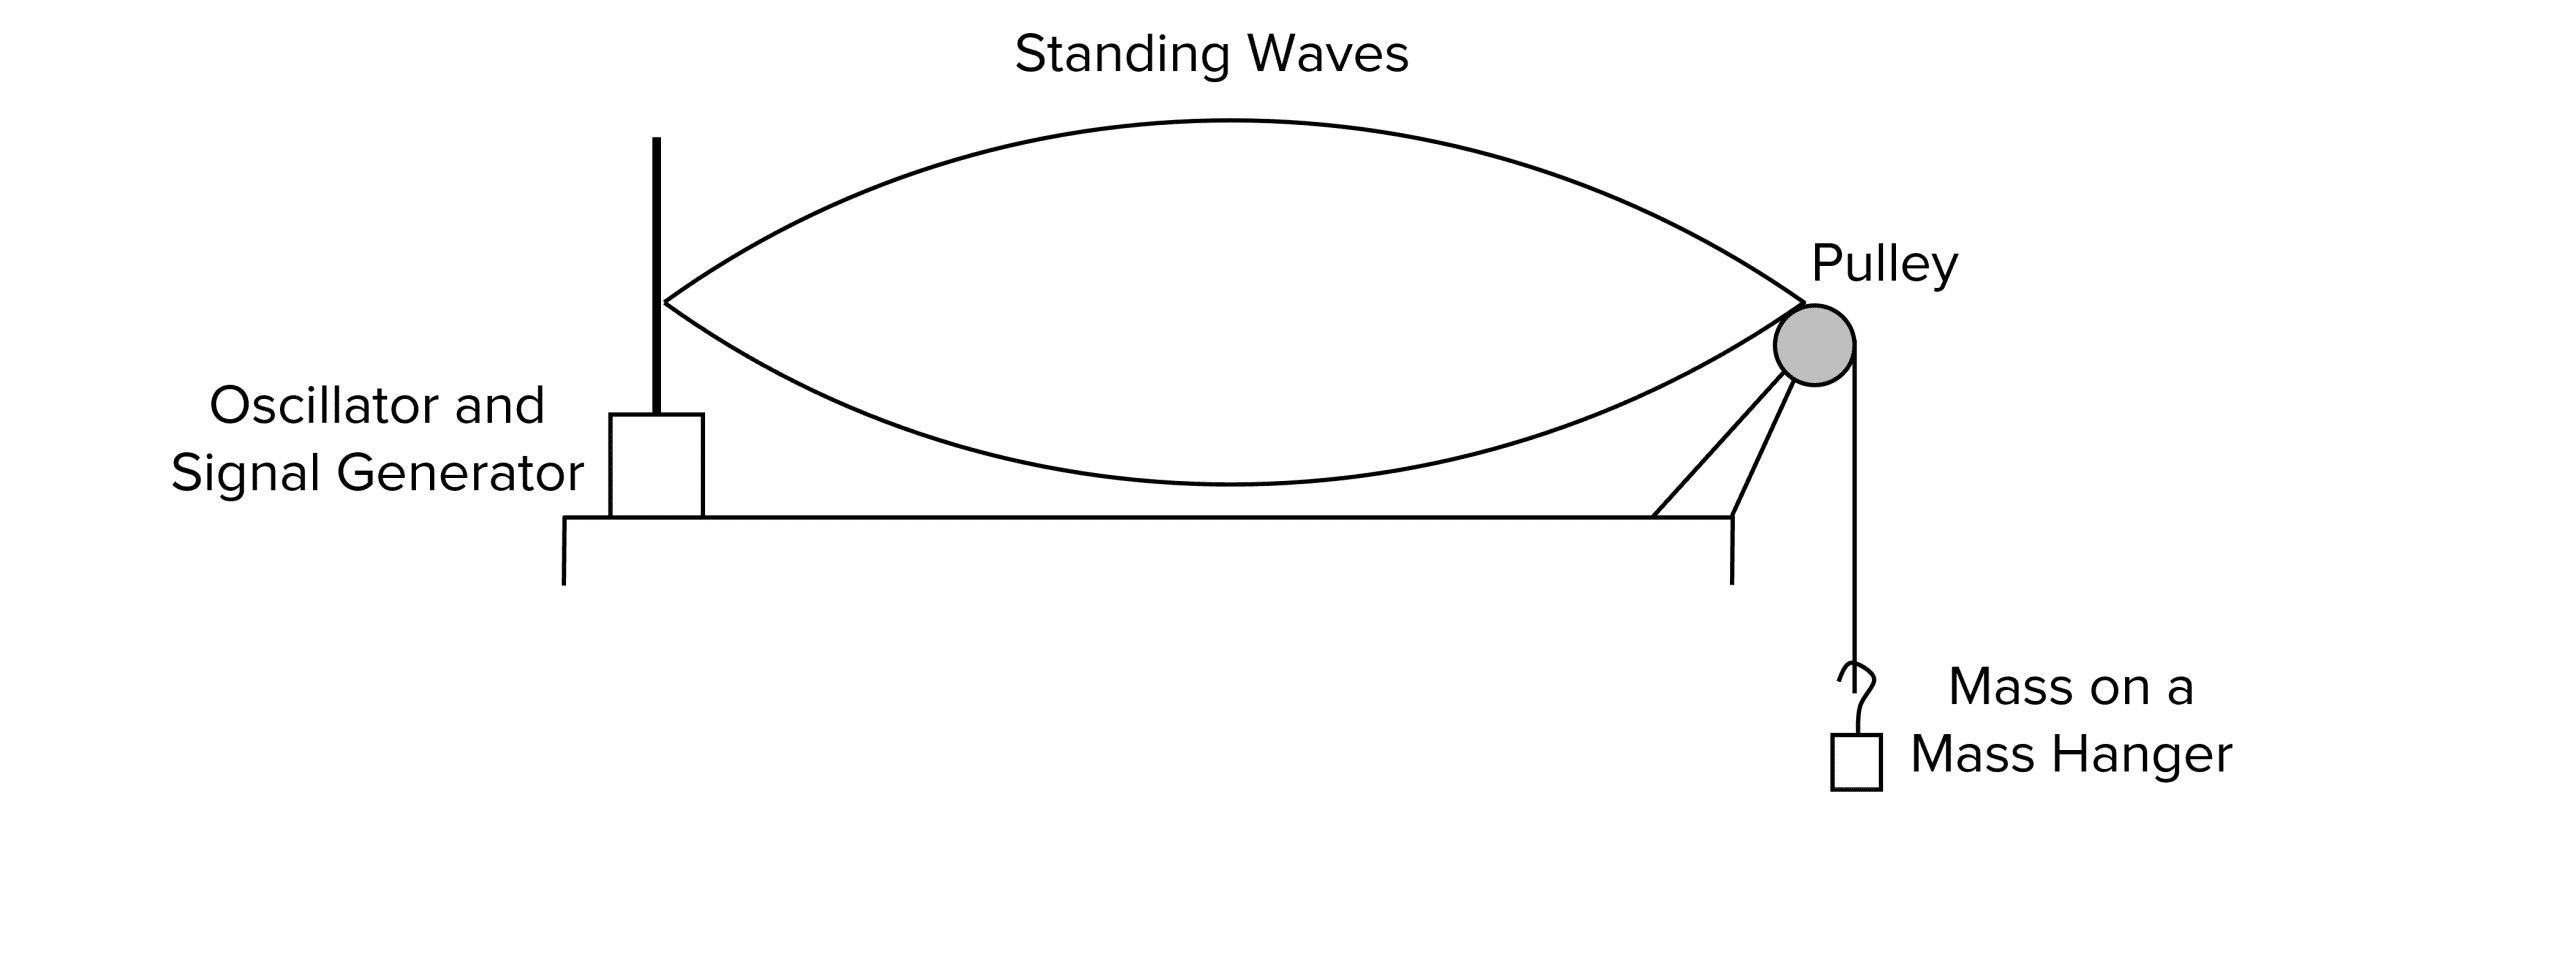 standing waves on a string experiment